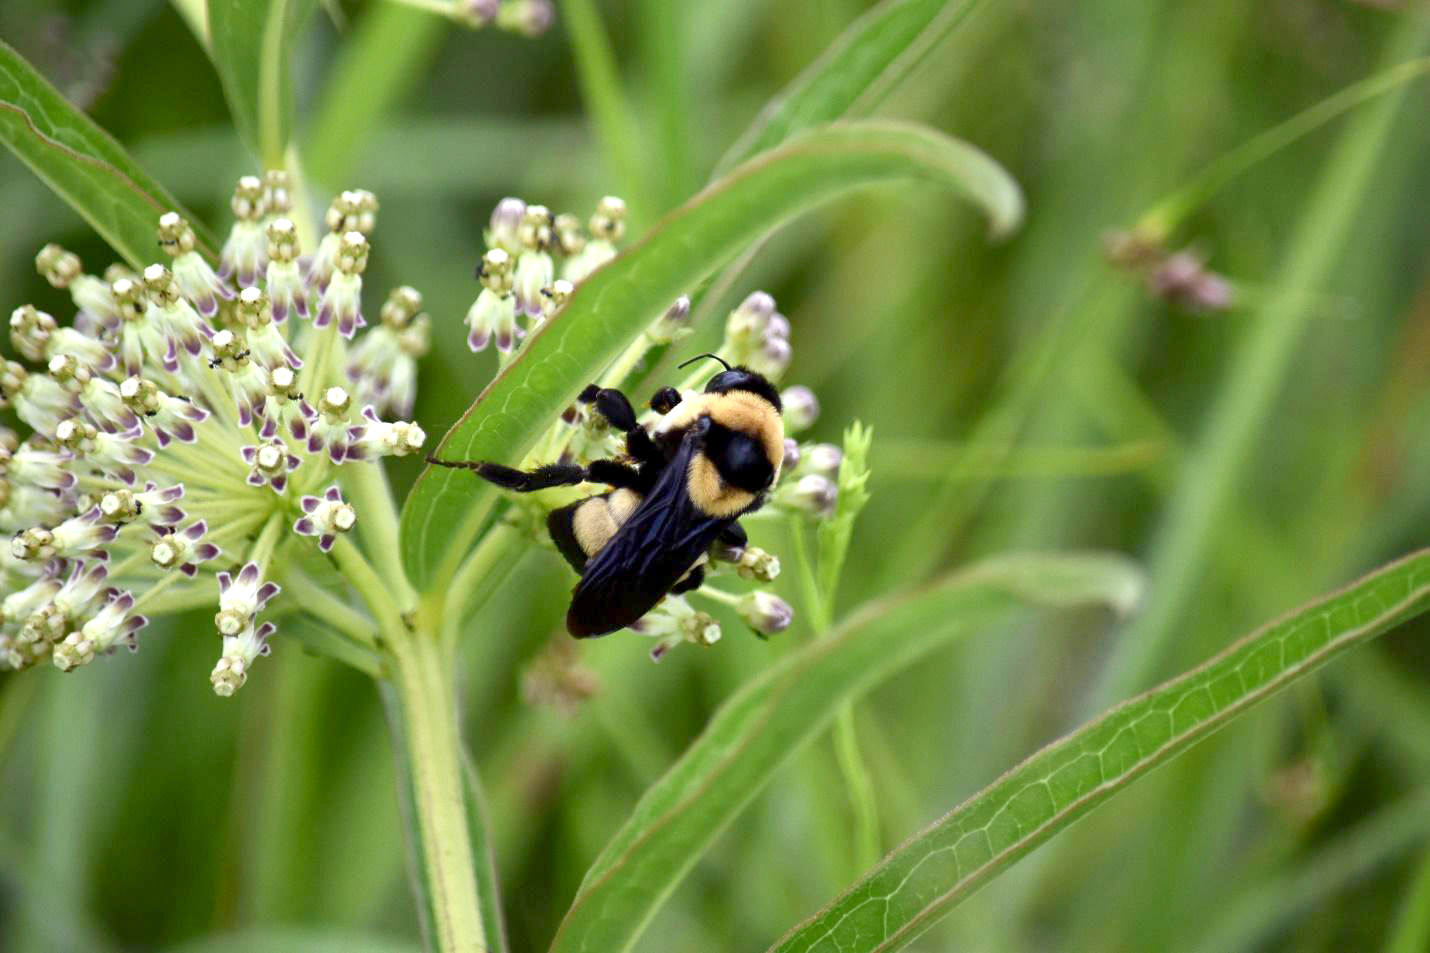 Southern plains bumble bee on milkweed blooms